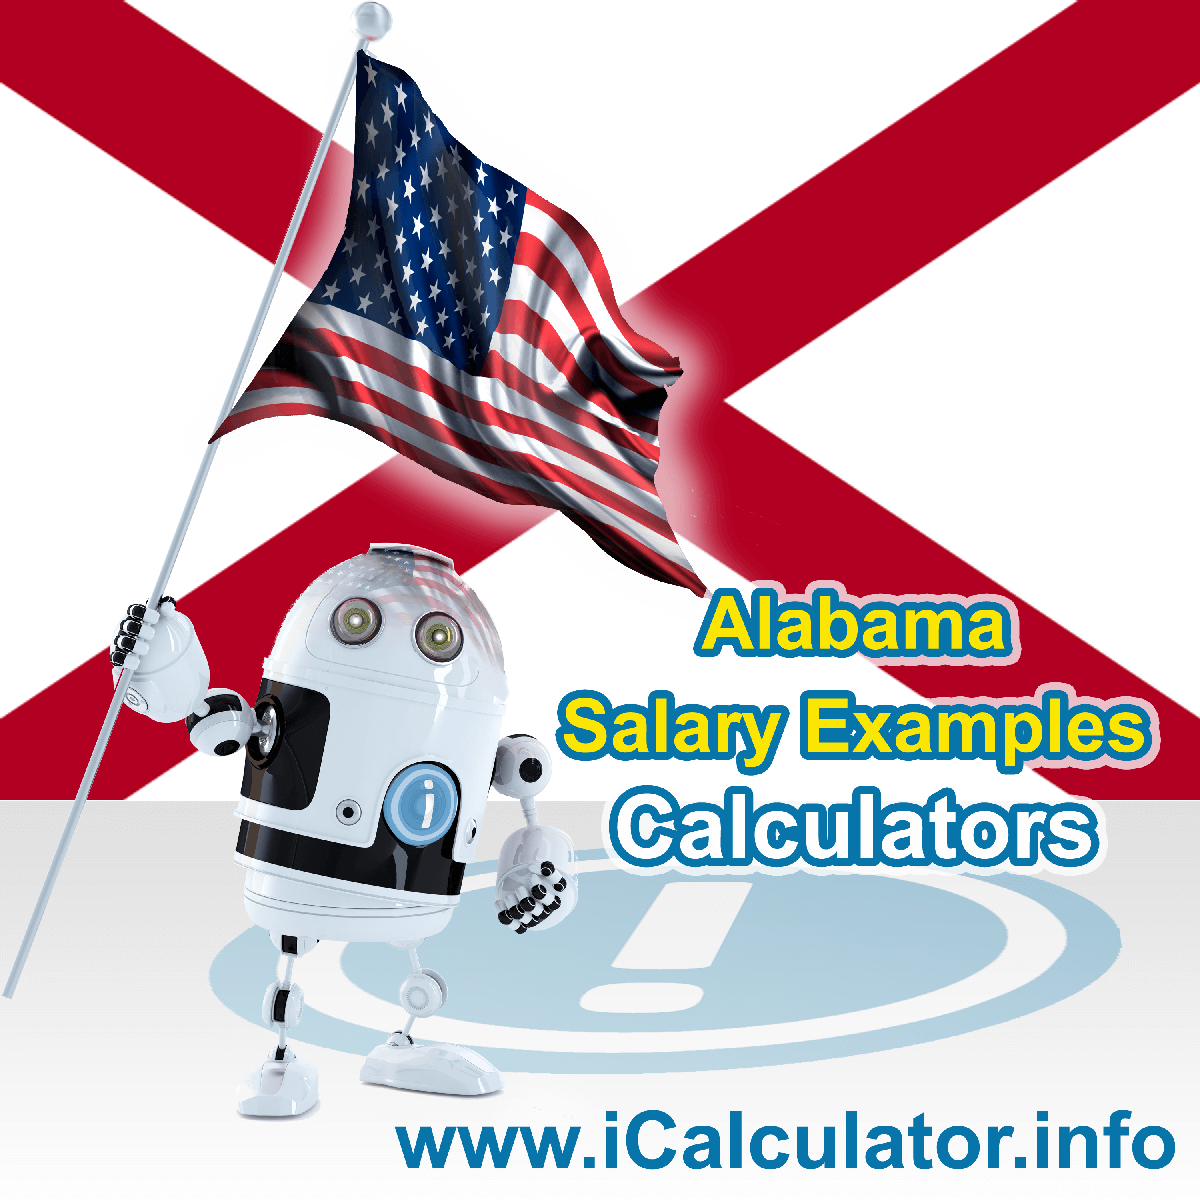 Alabama Salary Example for $ 220,000.00 in 2023 | iCalculator™ | $ 220,000.00 salary example for employee and employer paying Alabama State tincome taxes. Detailed salary after tax calculation including Alabama State Tax, Federal State Tax, Medicare Deductions, Social Security, Capital Gains and other income tax and salary deductions complete with supporting Alabama state tax tables 